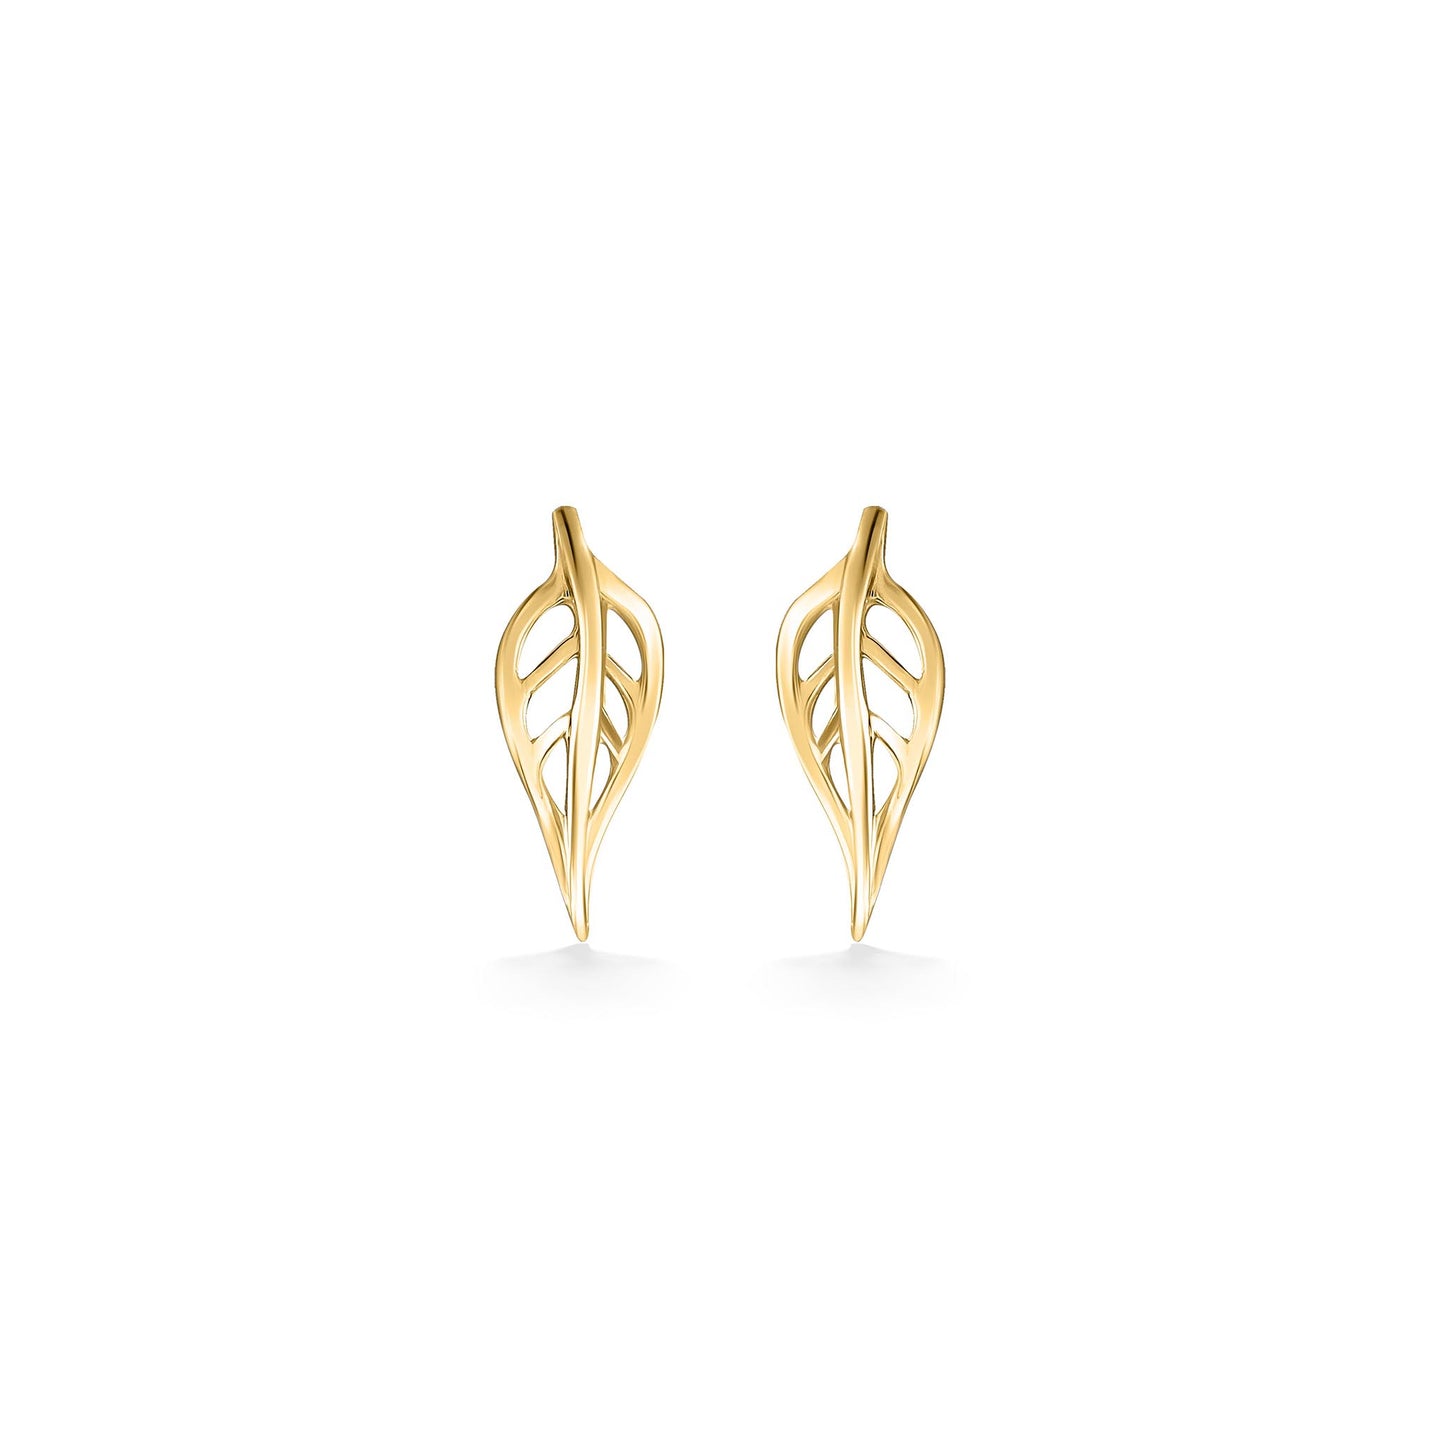 44397 - 14K Yellow Gold - Maile Leaf Stud Earrings